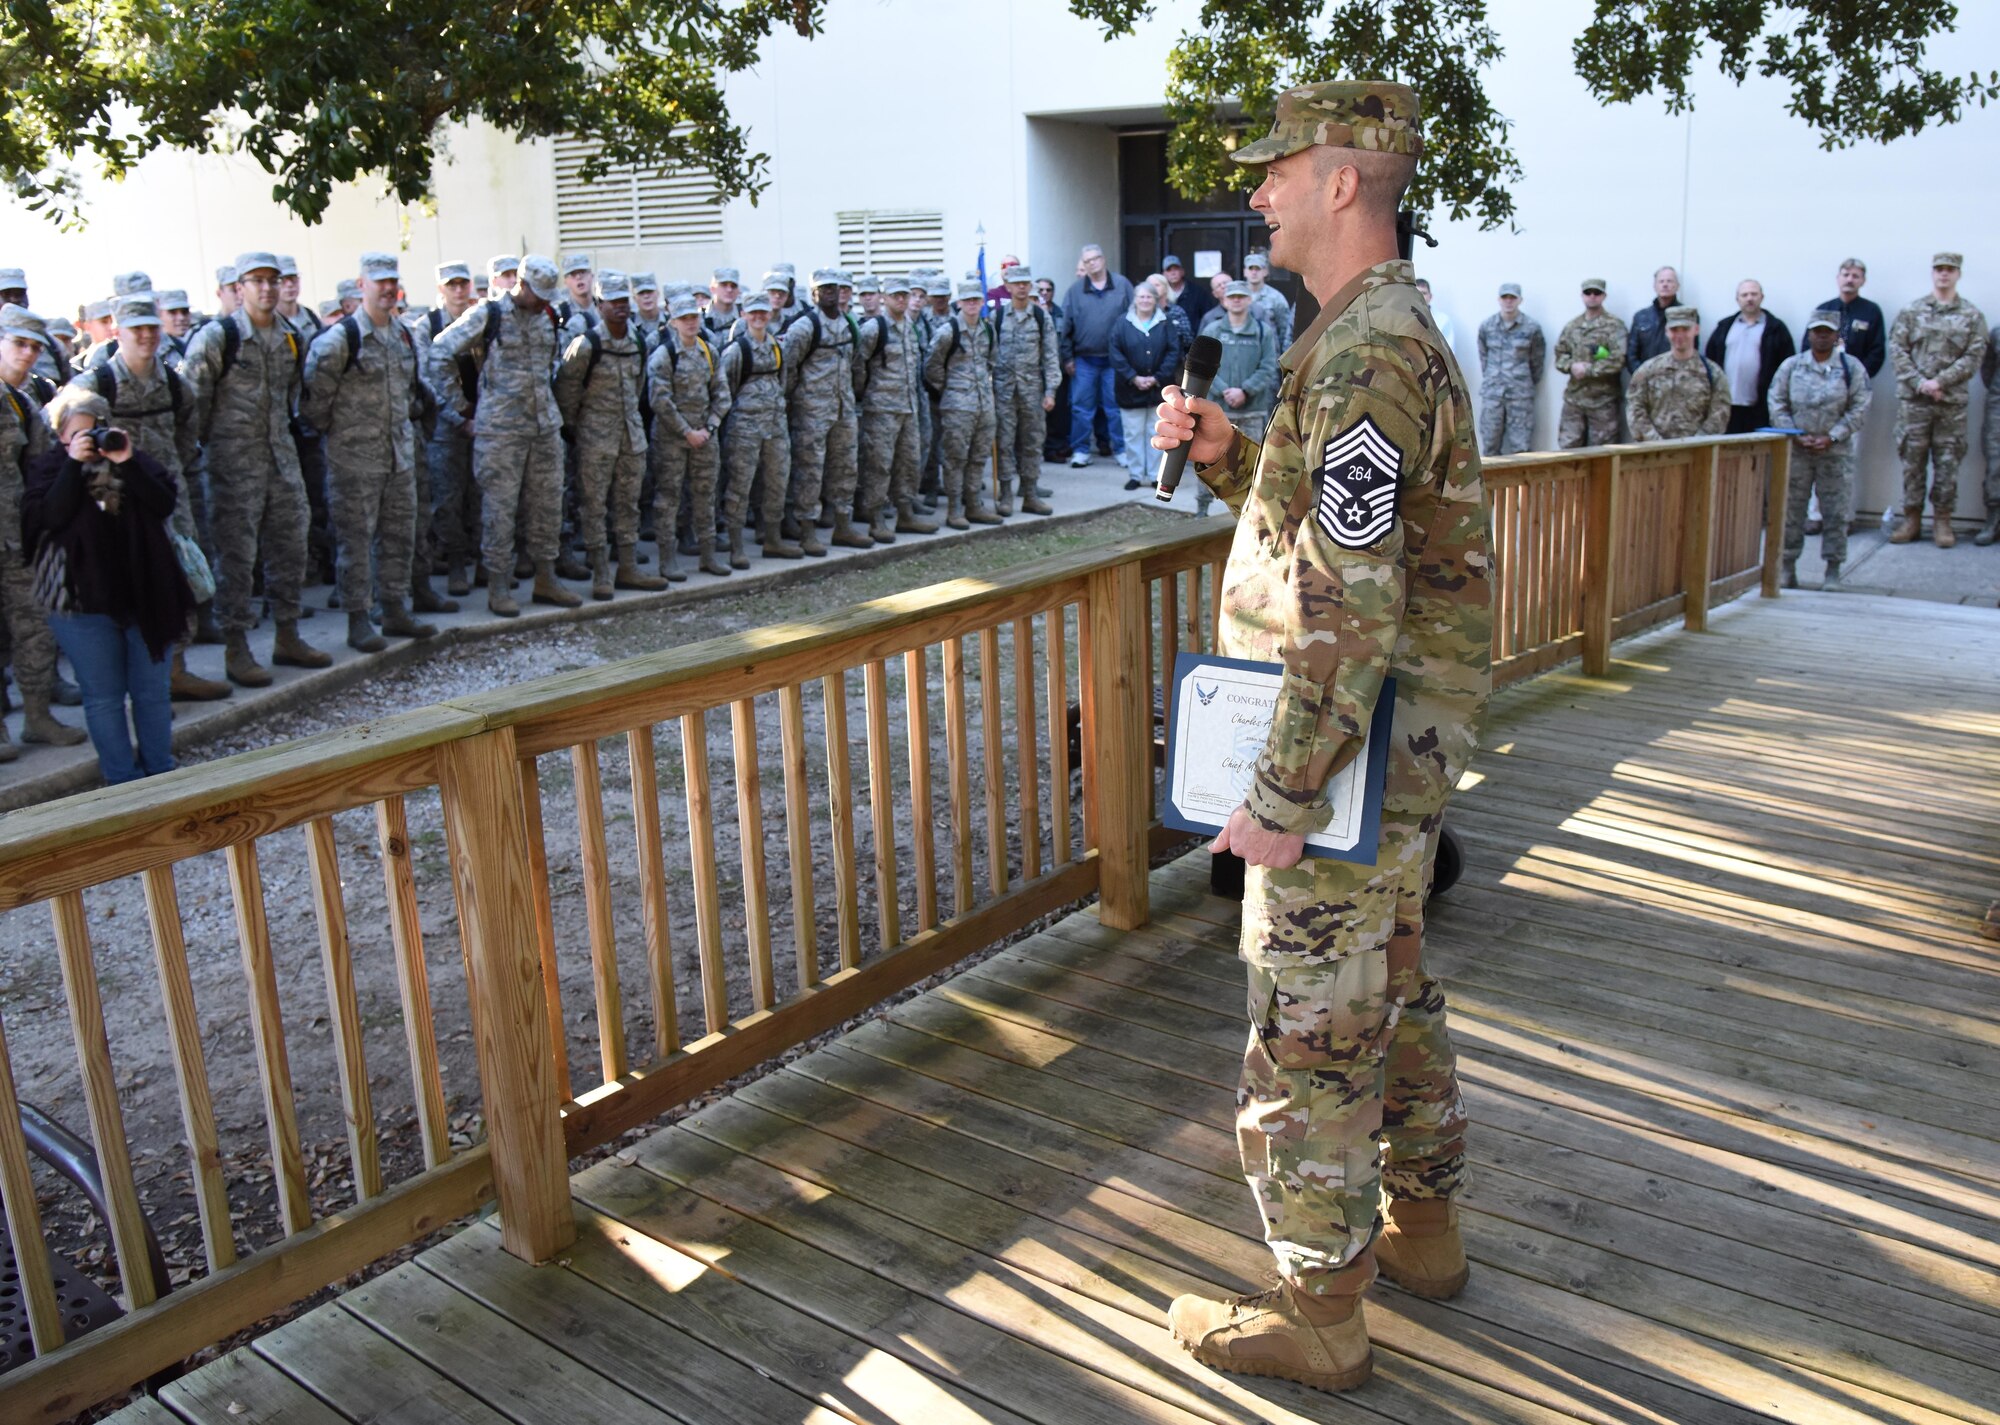 U.S. Air Force Senior Master Sgt. Charles Sargent, 338th Training Squadron flight chief, delivers remarks to technical training students upon the notification of his promotion to the rank of chief master sergeant at Keesler Air Force Base, Mississippi, Dec. 4, 2018. Five senior master sgts. were notified and congratulated for their promotion by the base's leadership and chiefs. (U.S. Air Force photo by Kemberly Groue)